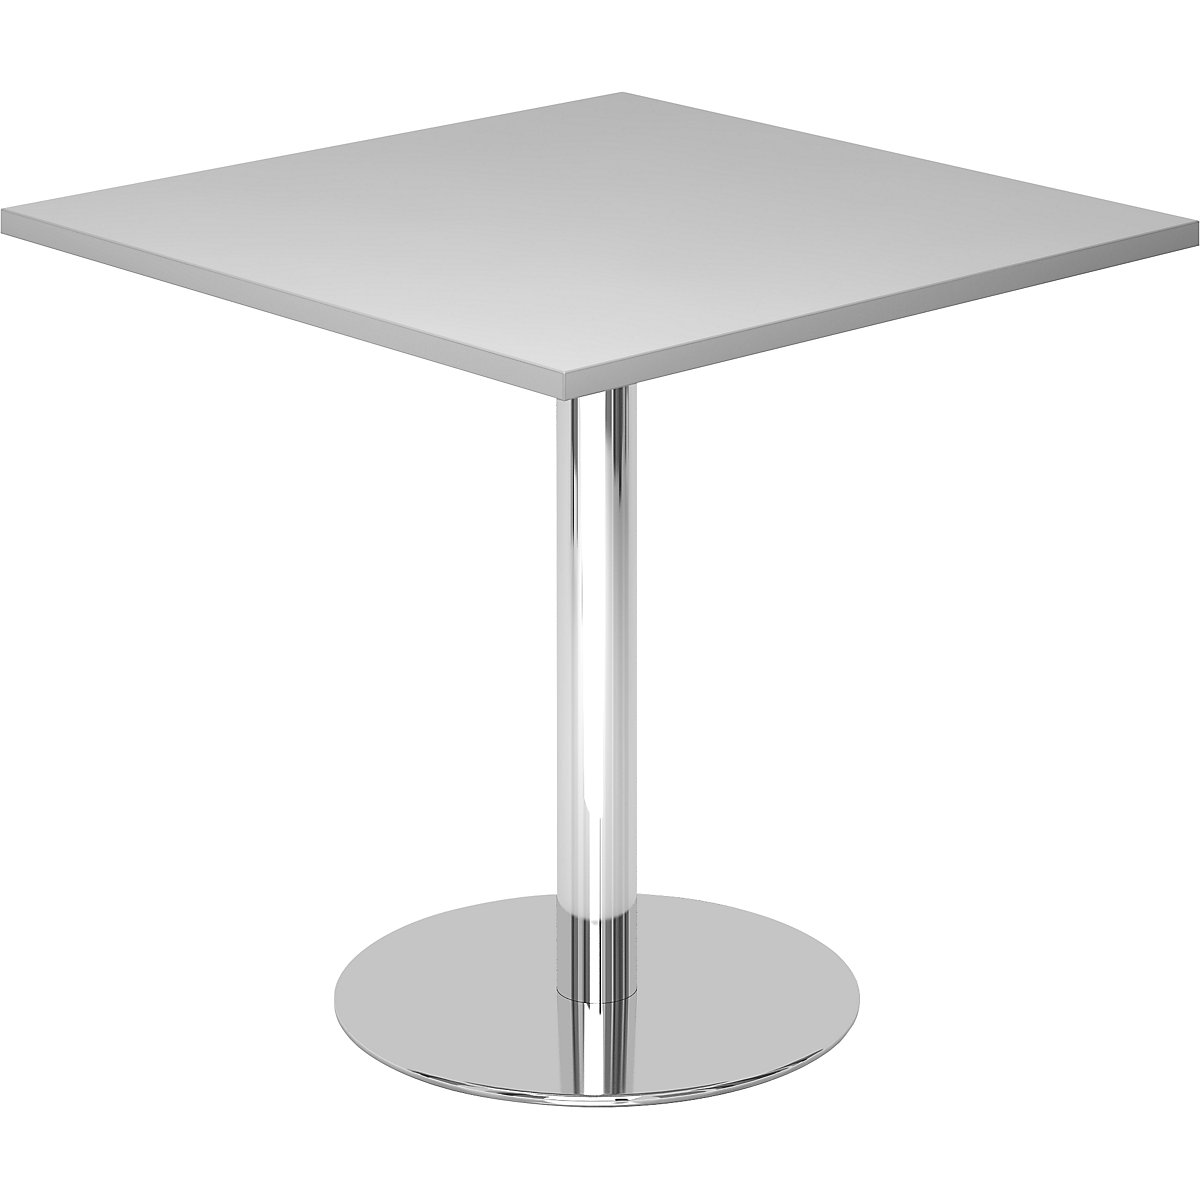 Conference table, LxW 800 x 800 mm, 755 mm high, chrome plated frame, tabletop in light grey-7